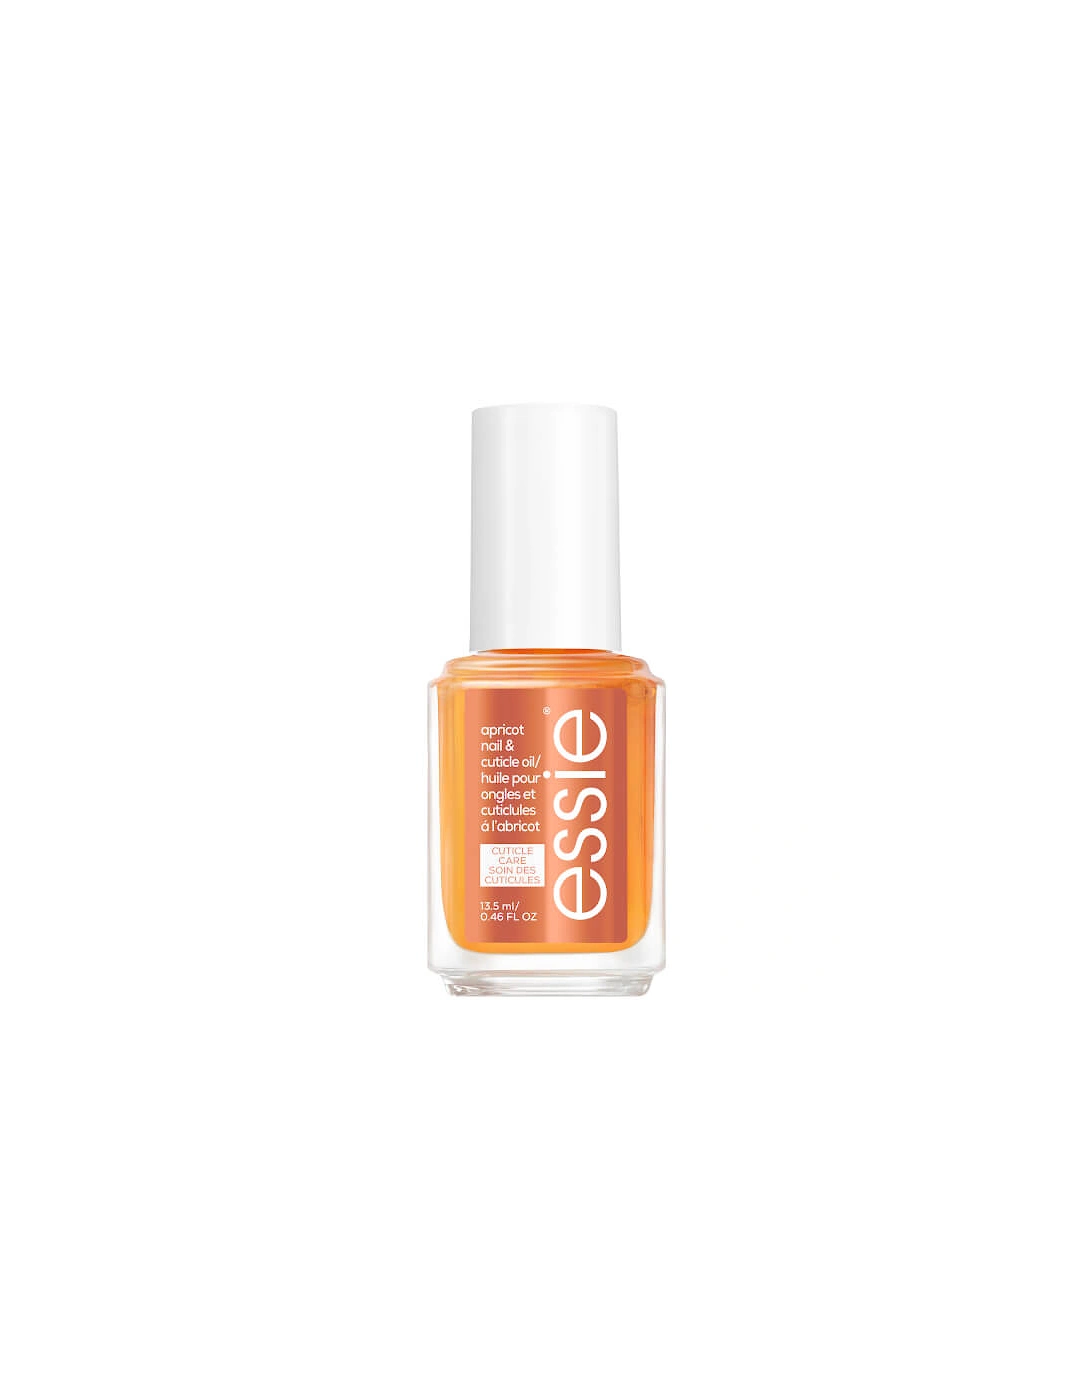 Nail Care Apricot Oil Cuticle Treatment - essie, 2 of 1